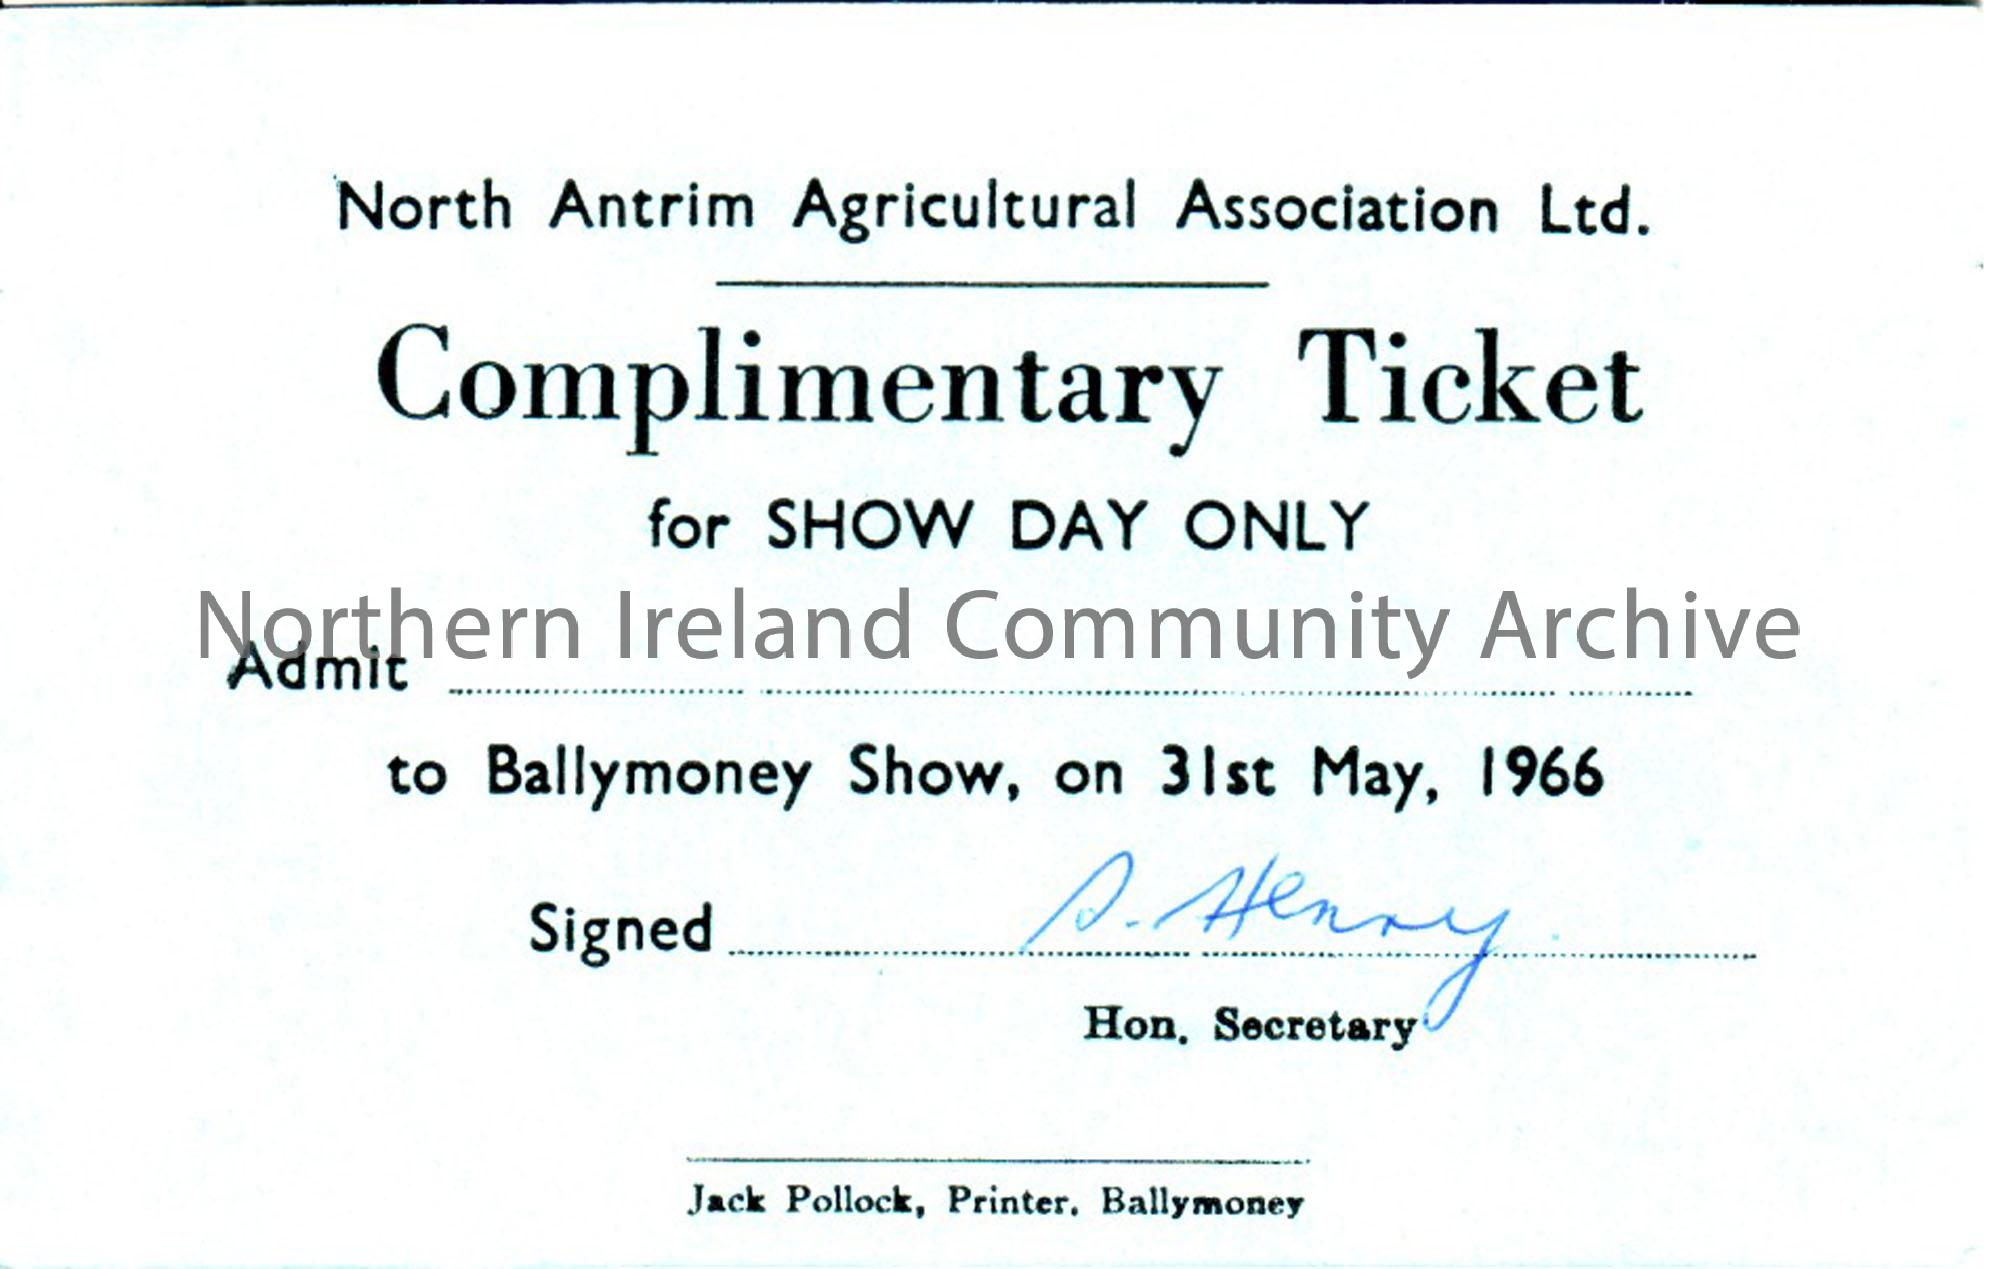 Ballymoney Fair. North Antrim Agricultural Association Ltd. Complimentary Ticket, for Show day only to Ballymoney Show, 31st May, 1966